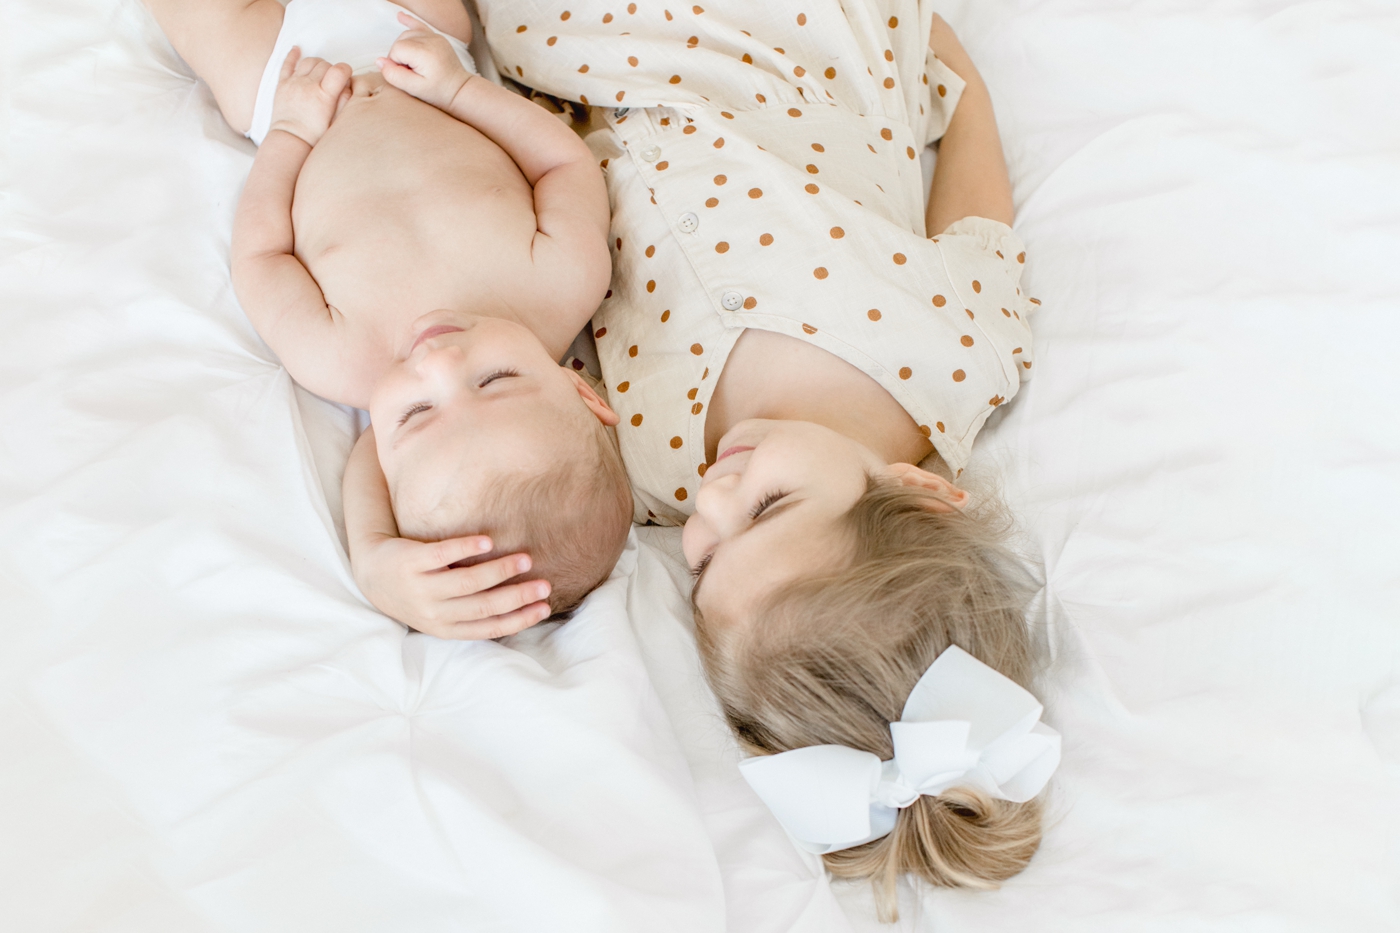 Sweet sister hugging baby brother as he lays on her arm. Photo by Austin TX family photographer, Sana Ahmed Photography.